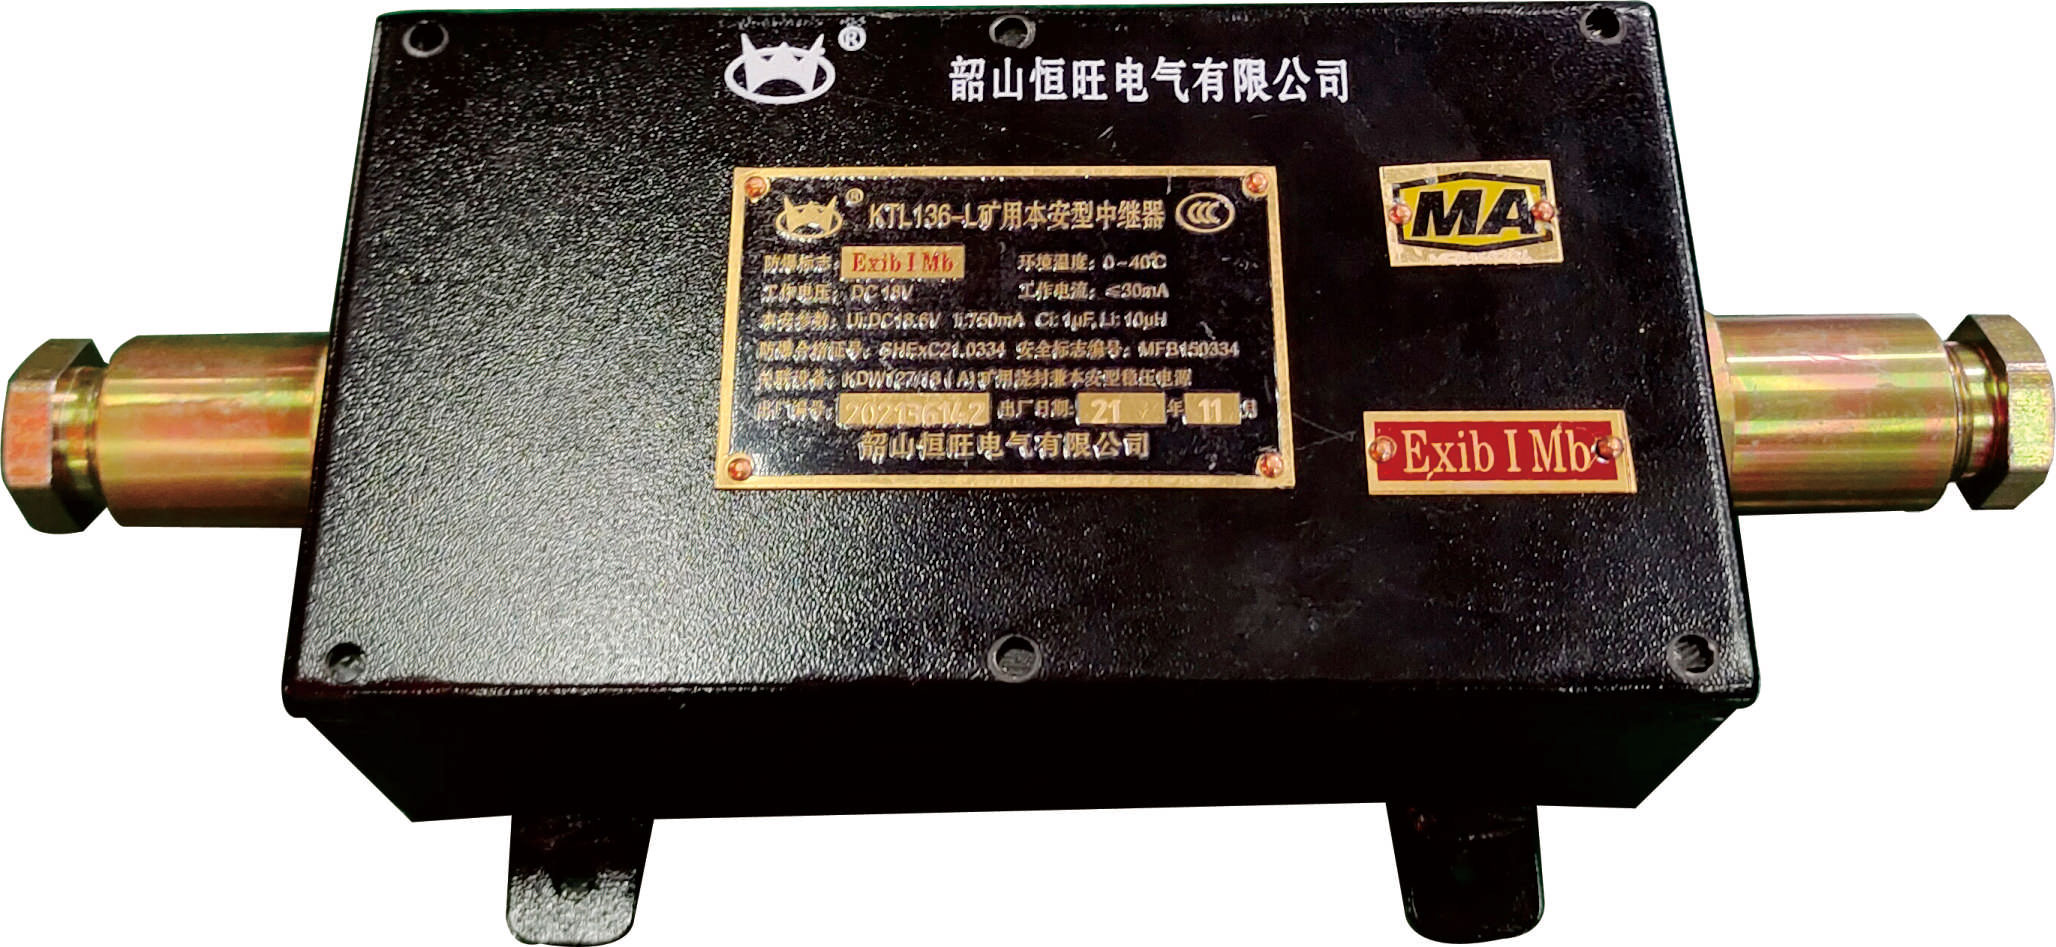 KTL136-L Mining Intrinsic Safety Repeater